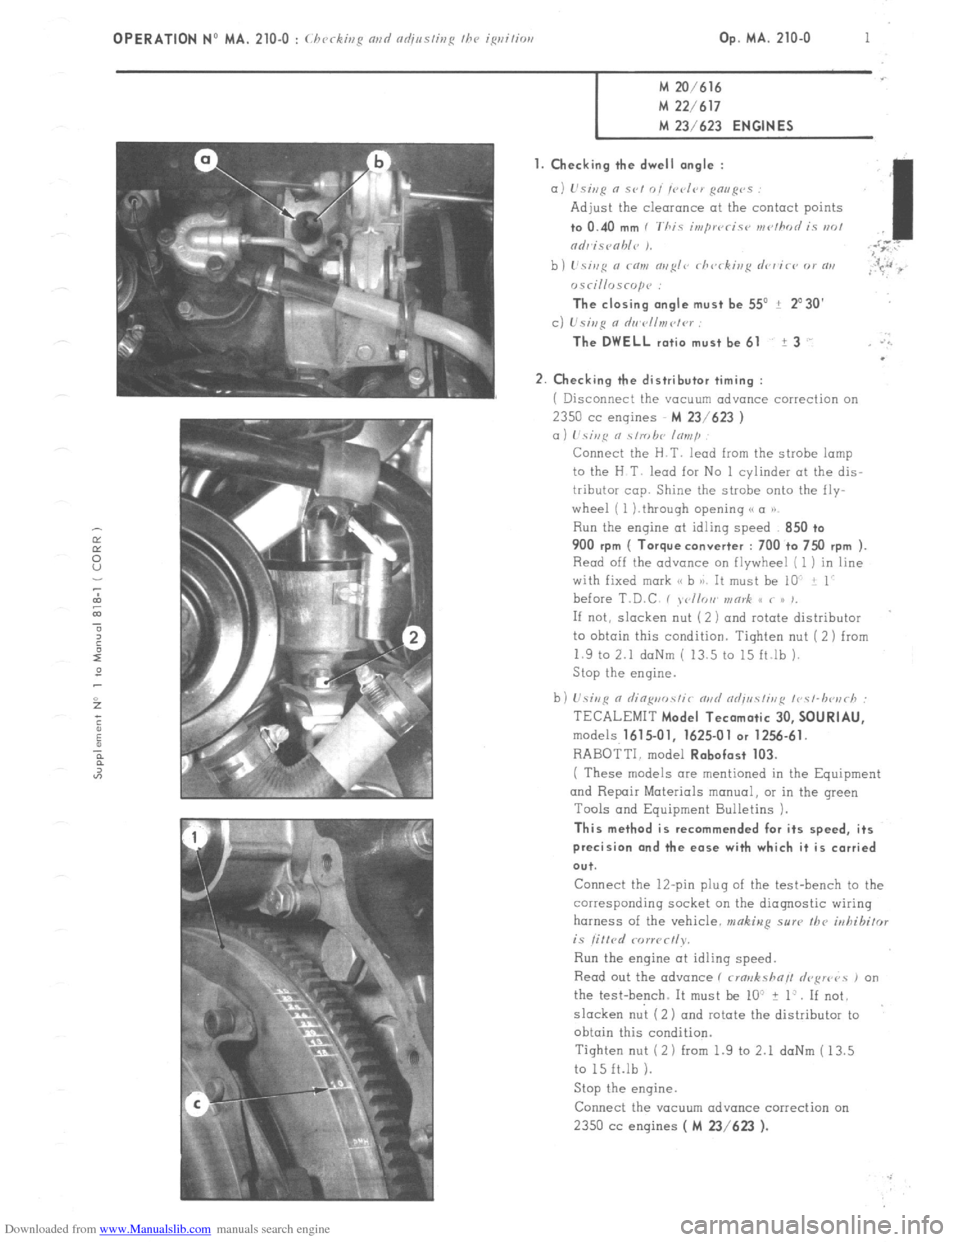 Citroen CX 1977 1.G Workshop Manual Downloaded from www.Manualslib.com manuals search engine OPERATION NO MA. 210-o : chcJckir,R fl,,d fld;linshp the, iRrlihil Op. MA. 210-O 1 
M 20/616 M 22/617 
M 23/623 
ENGINES 
1. Checking the dwell